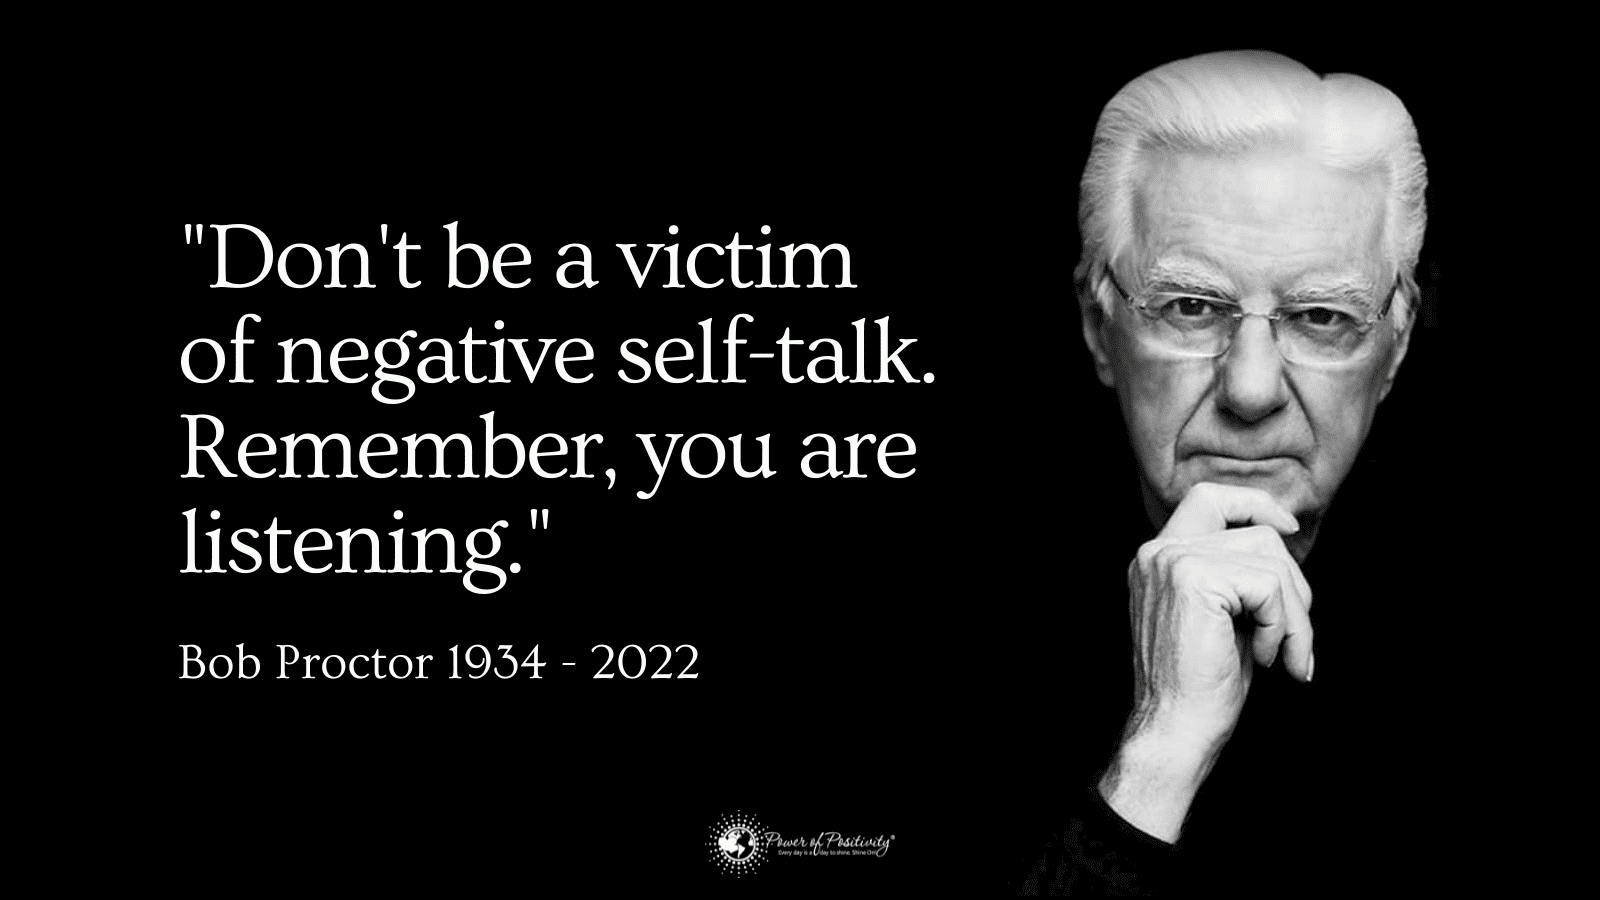 30 Motivational Quotes About Life From Bob Proctor | Power of ...